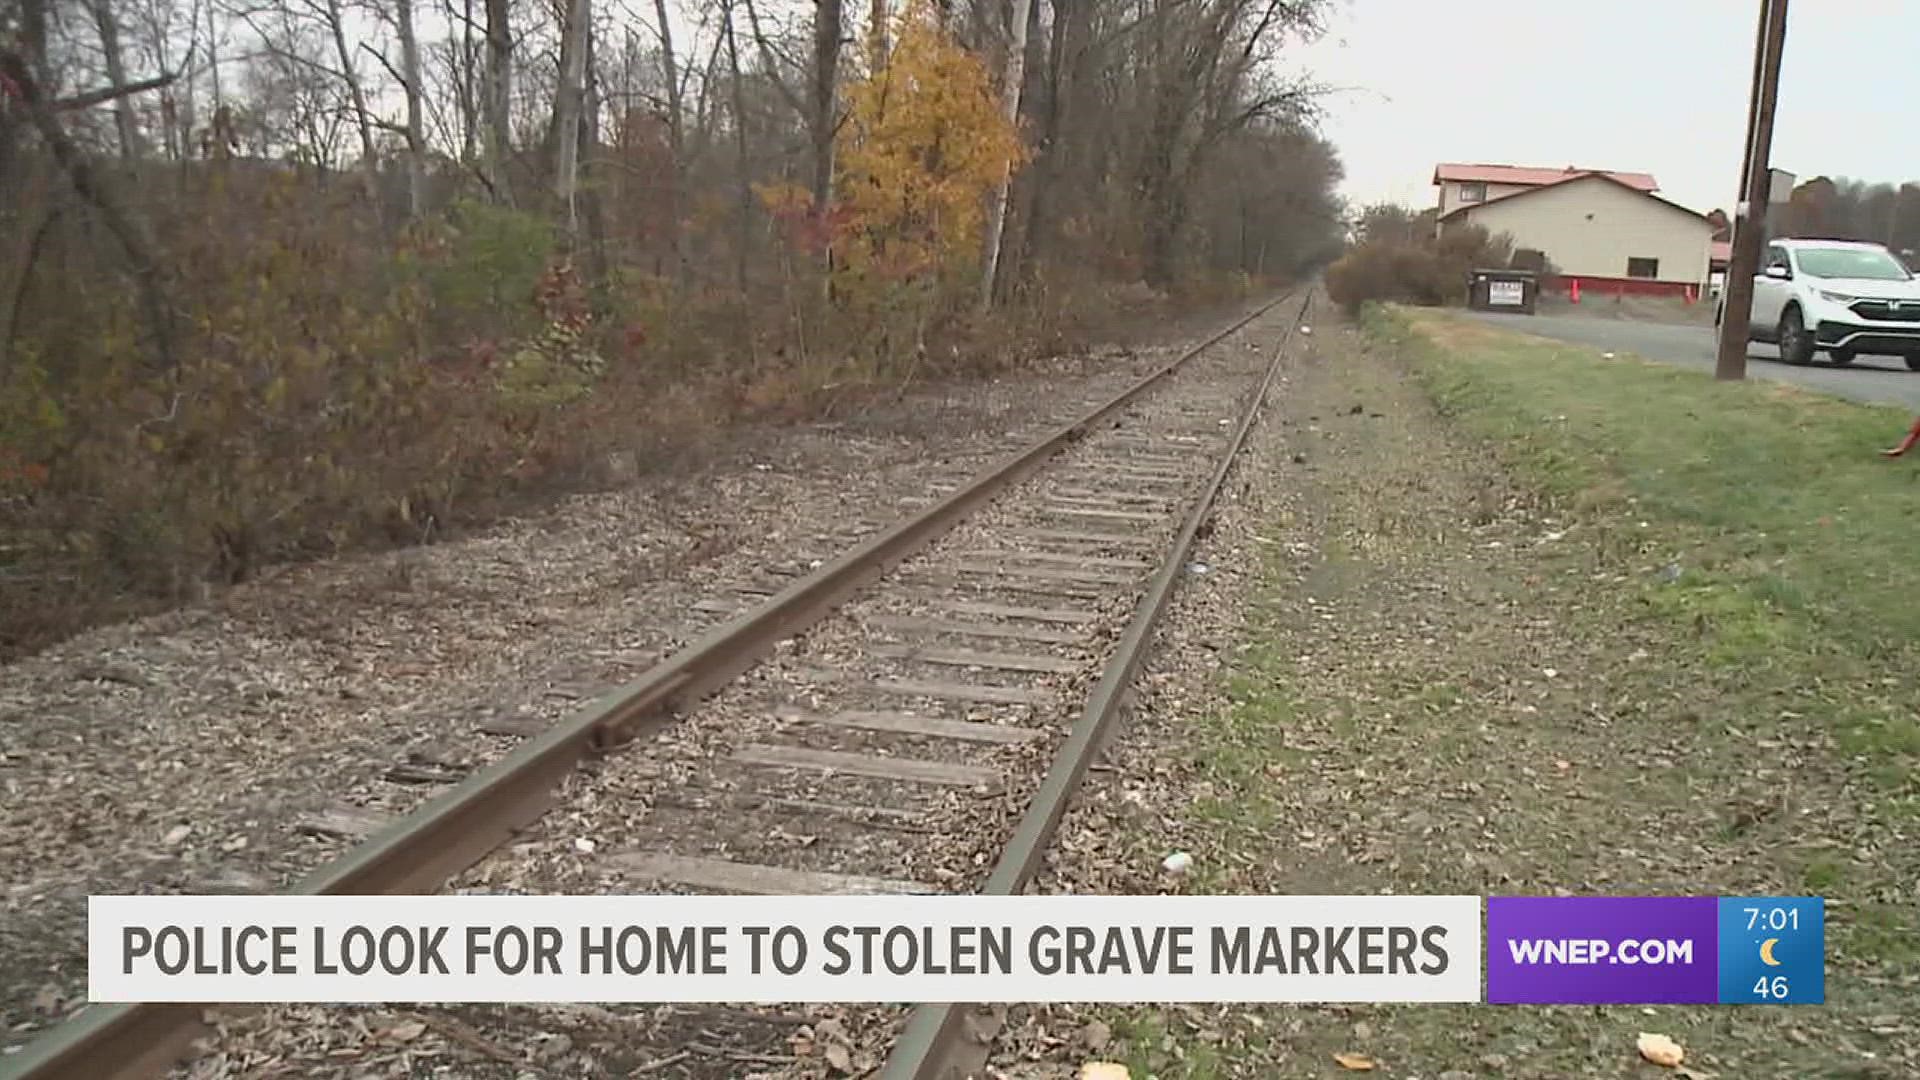 19 veteran grave markers were recovered near railroad tracks in Plains Township.